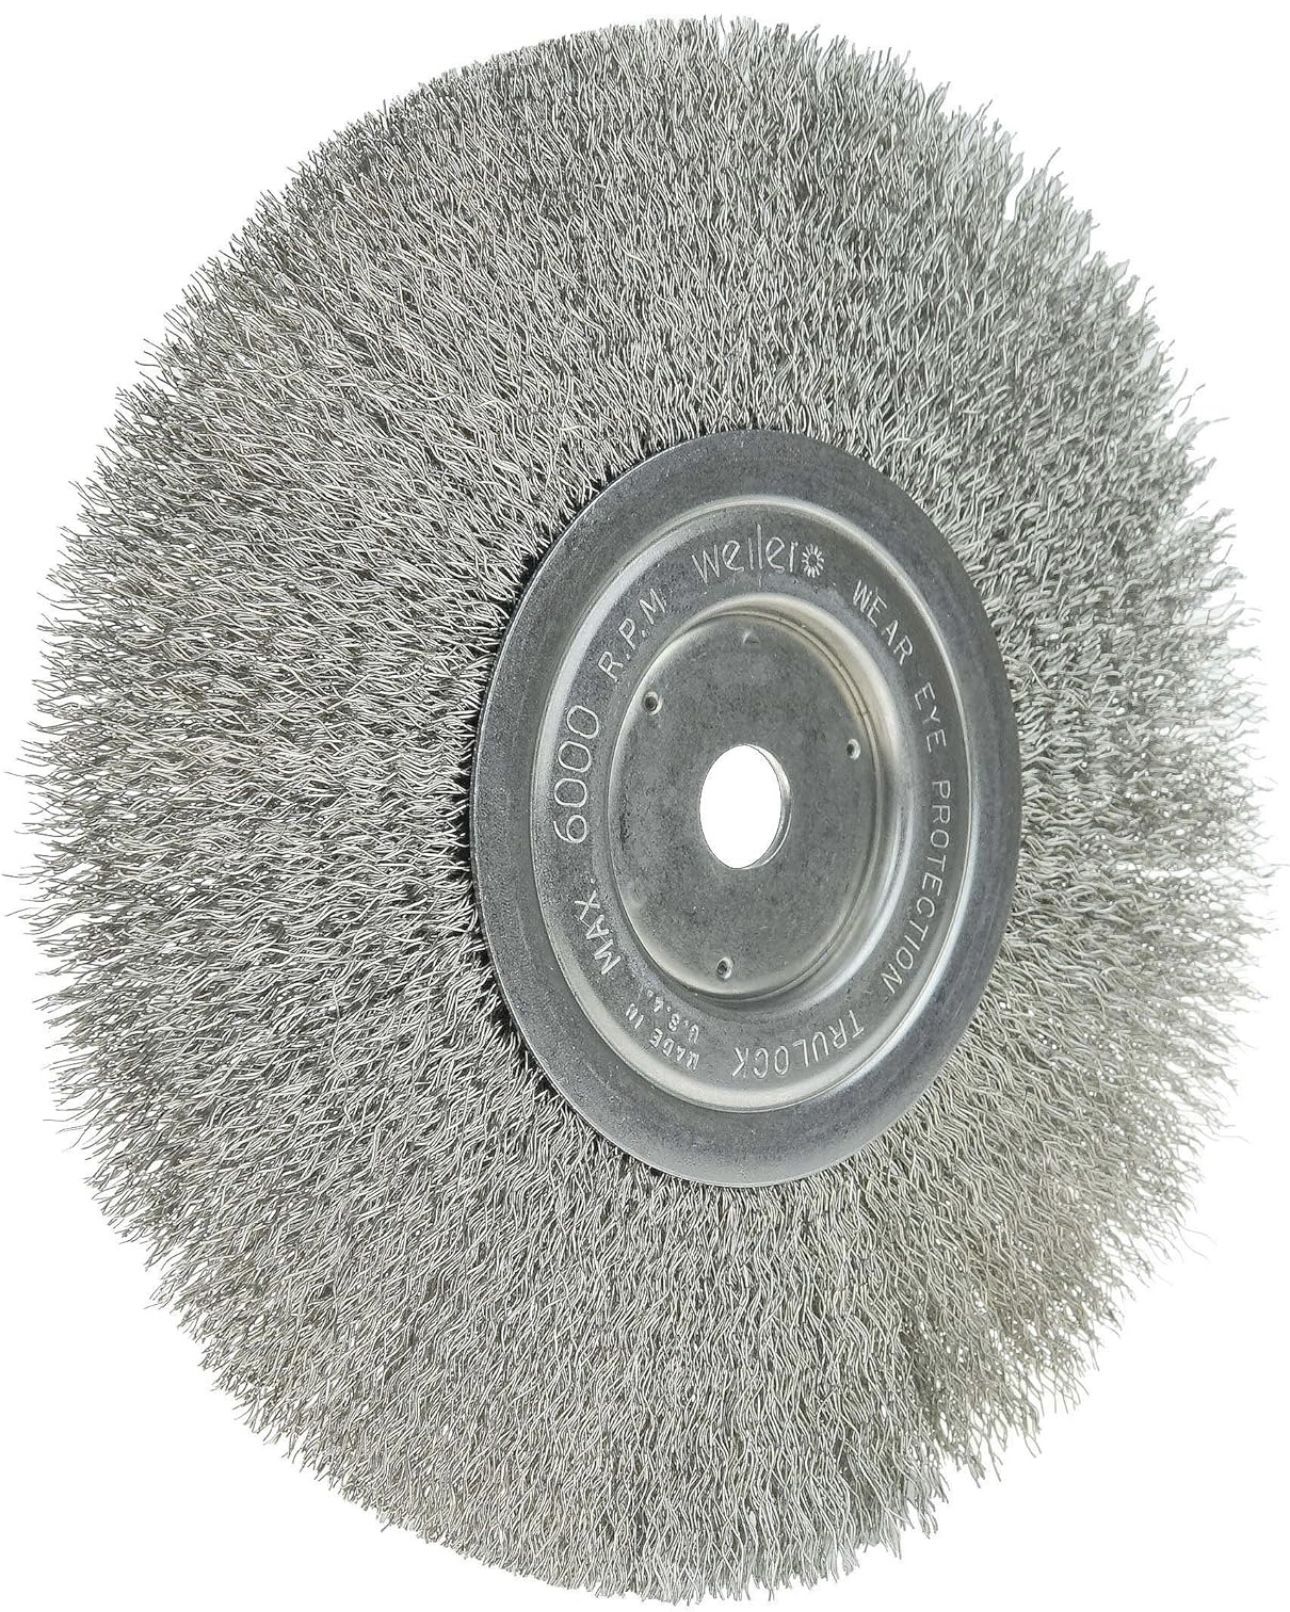 Weiler 01805 8" Narrow Face Crimped Wire Wheel, .0118" Stainless Steel Fill, 5/8" Arbor Hole, Made in the USA